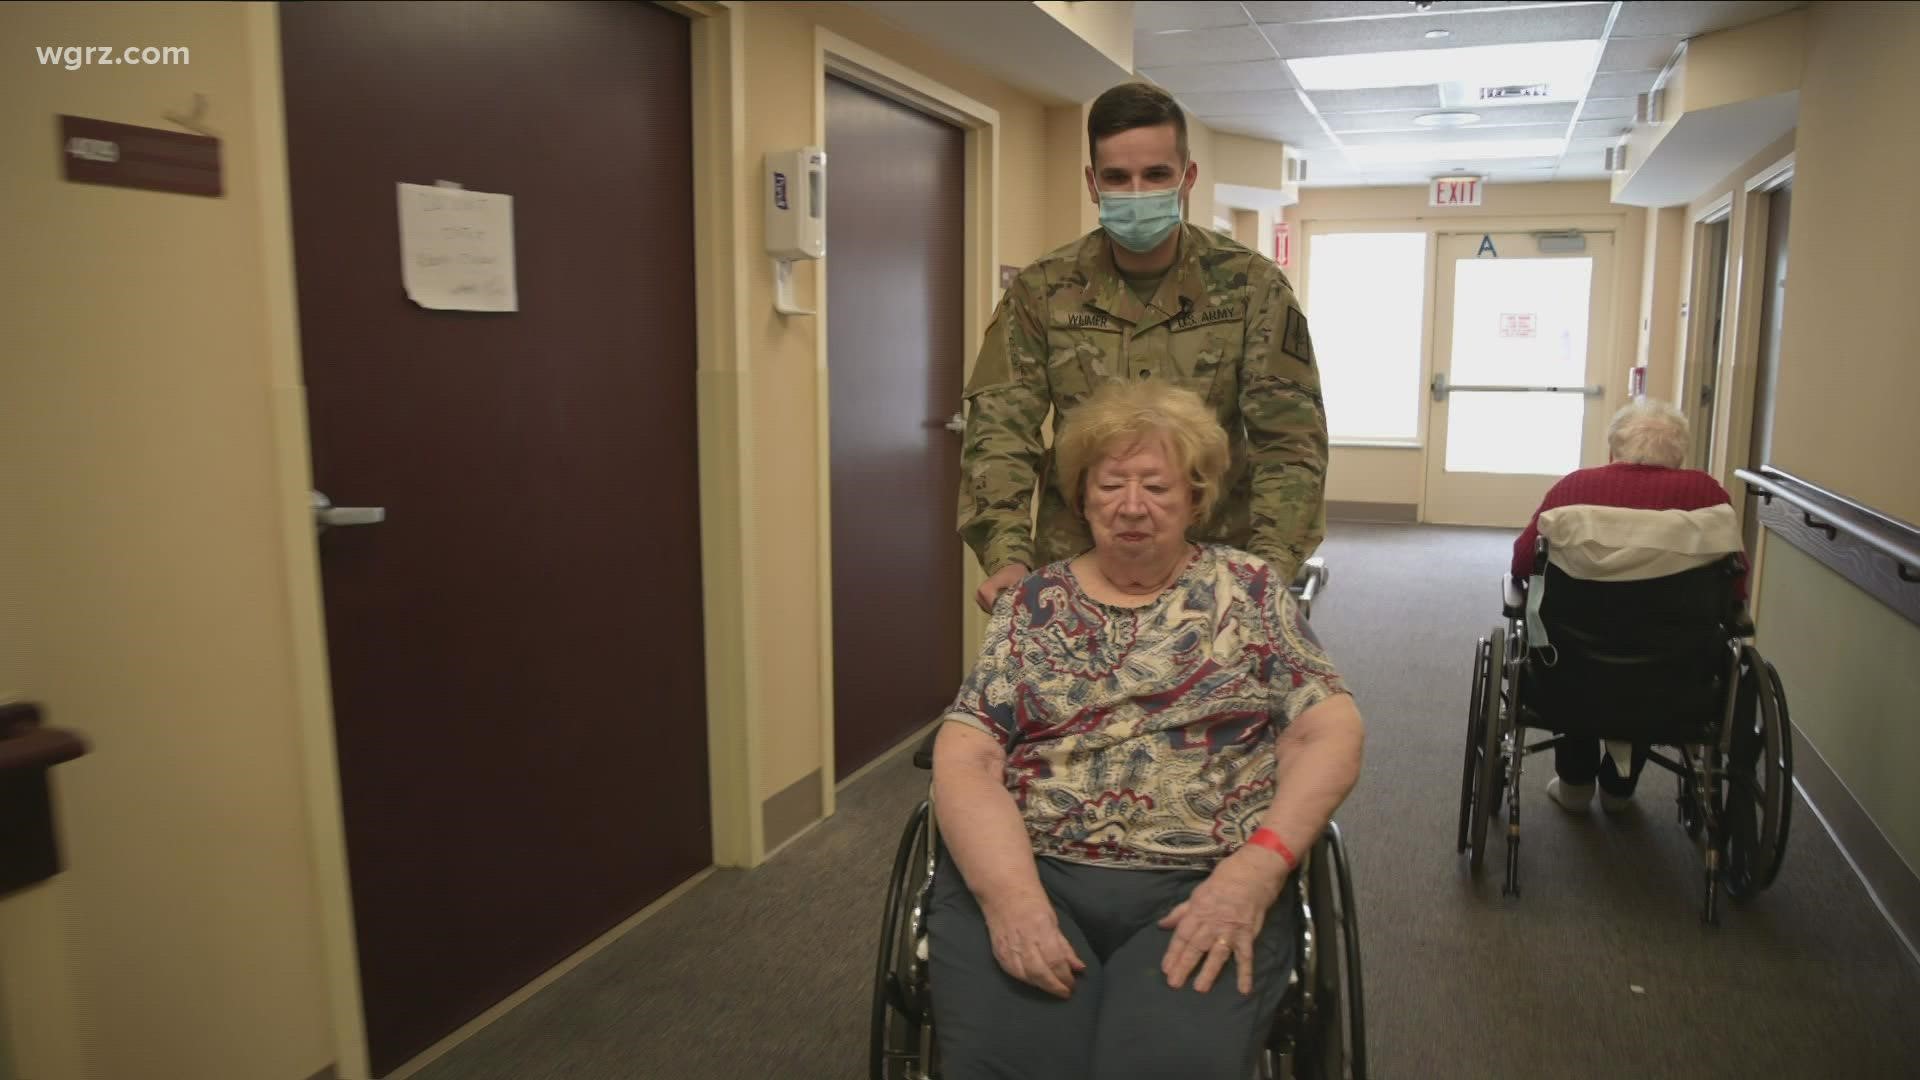 Channel 2's Michael Wooten takes us into a nursing home where men and women in uniform are helping in hard hit nursing homes from the pandemic.